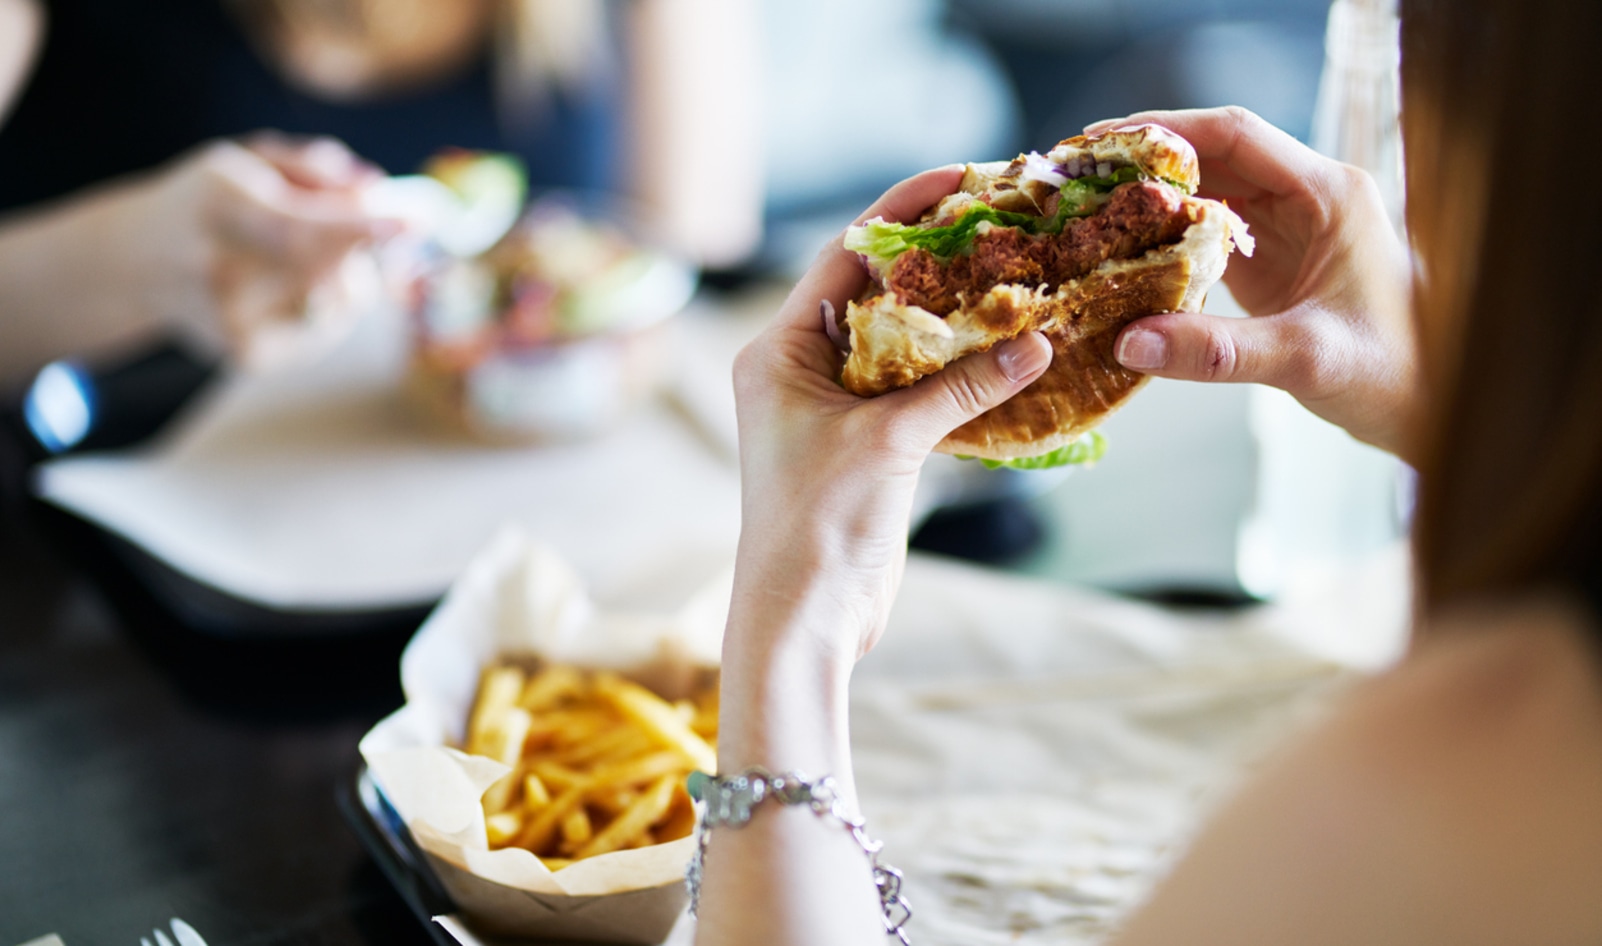 Veganuary, Fast Food, and Gen Z: Why the UK Is So Vegan-Friendly Right Now